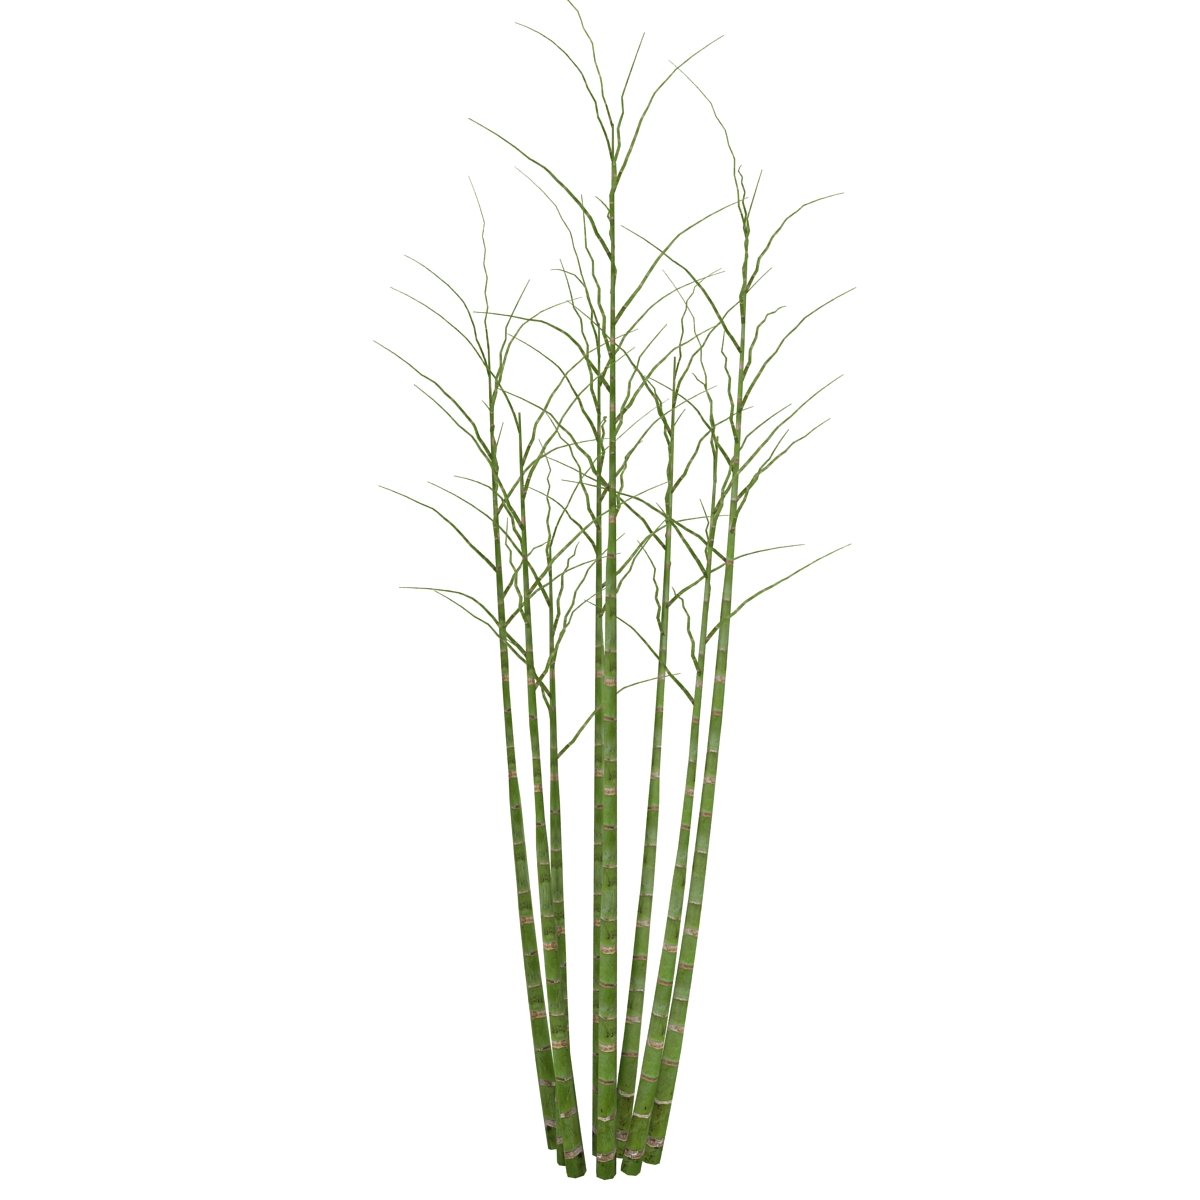 Tall green plant with thin branches on a white background.